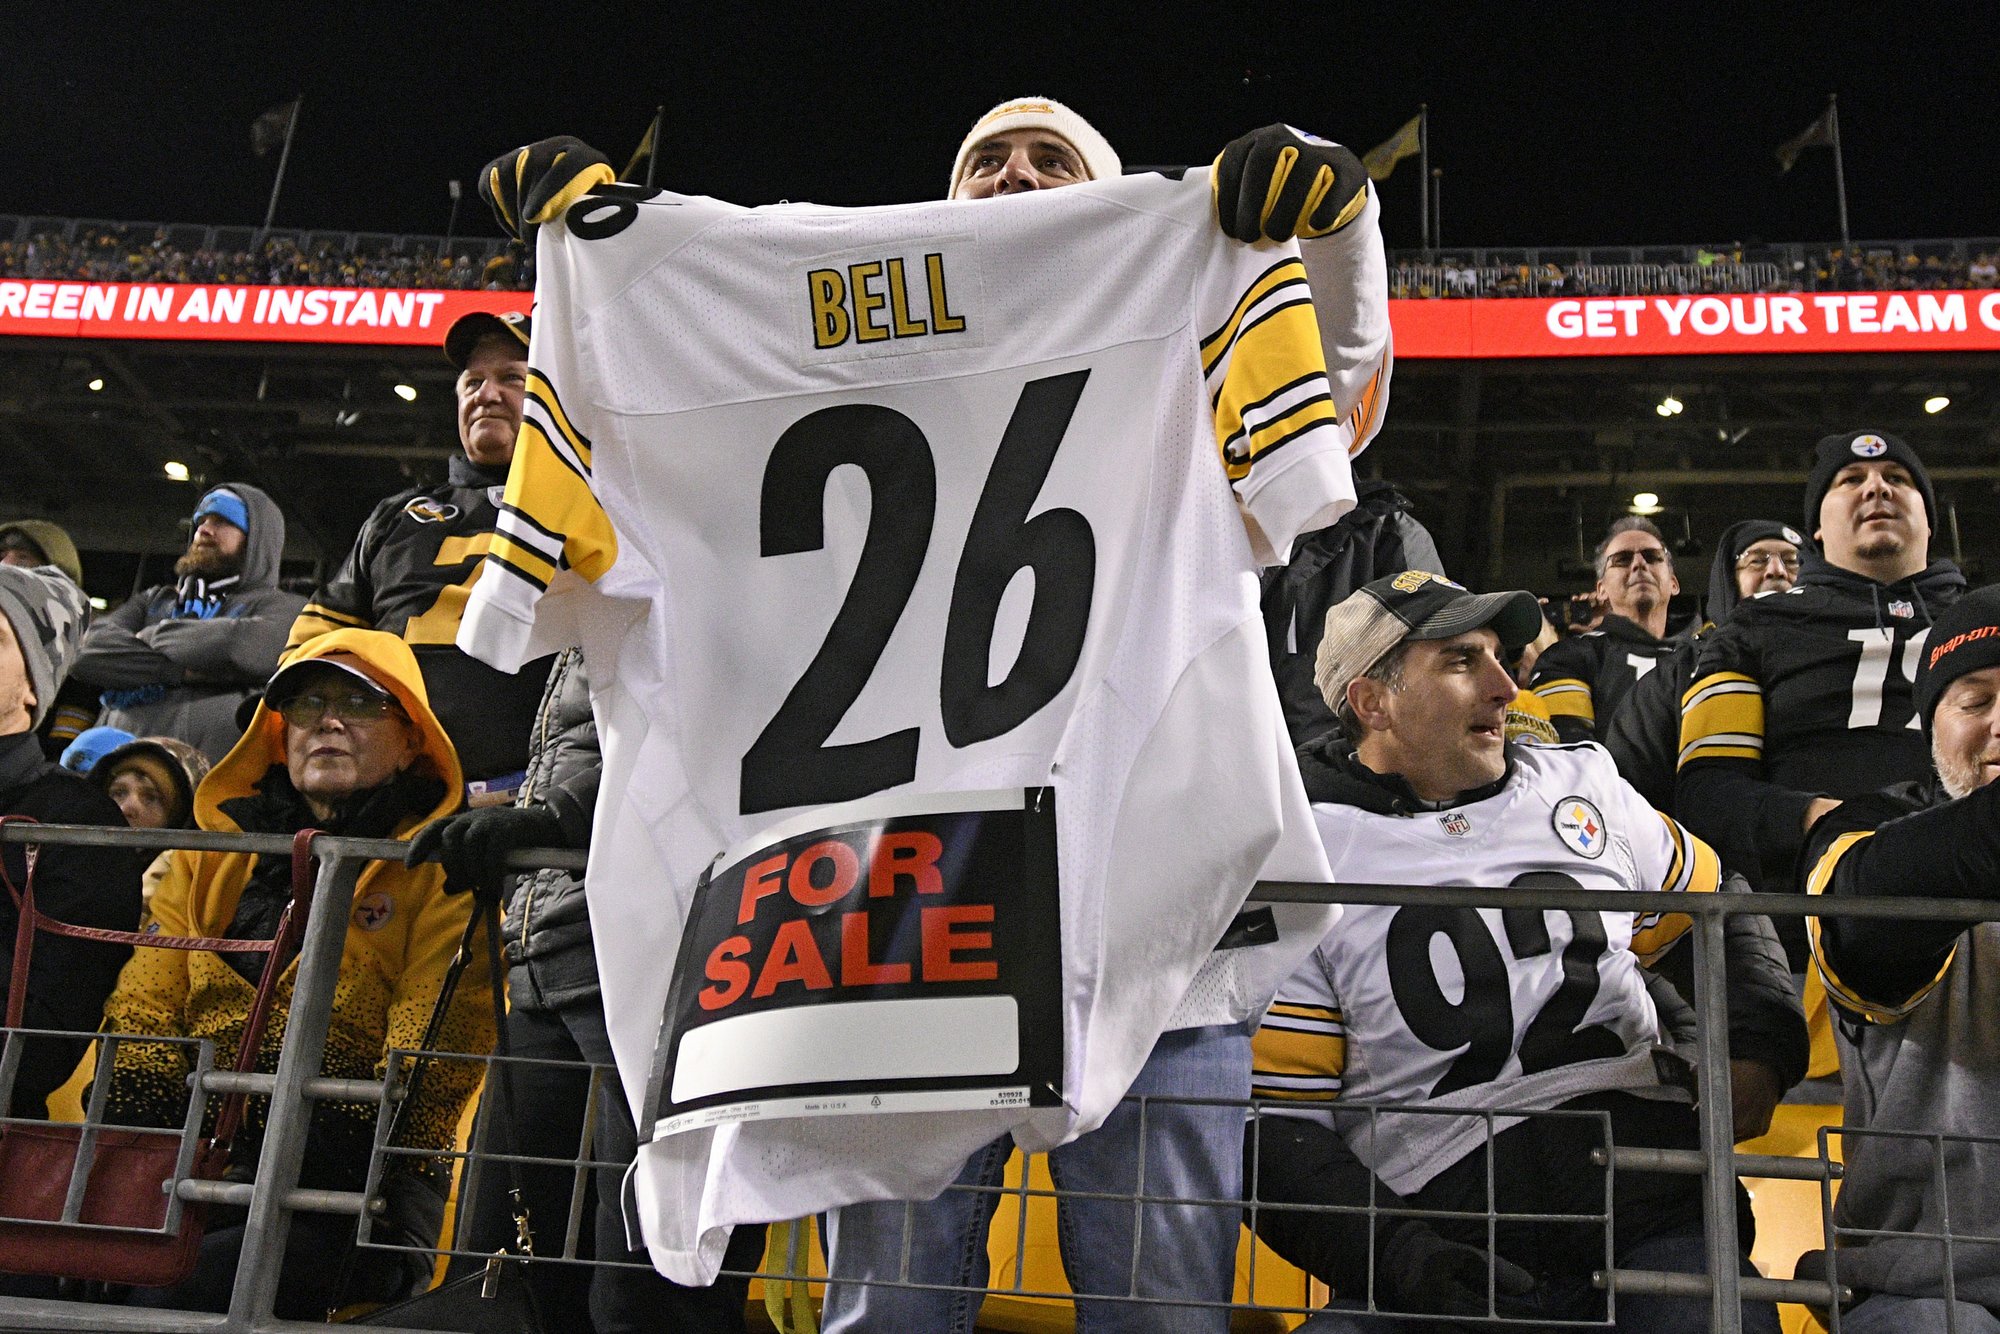 FILE - In this Nov. 8, 2018, file photo, a Pittsburgh Steelers fan holds a Le'Veon Bell jersey during the second half of an NFL football game between the Steelers and the Carolina Panthers in Pittsburgh. The steady exodus of mid-level veterans from the NFL is one element of a long-standing tension between players and the league over the structuring of contracts. The contract holdouts by Bell and Earl Thomas this season put the issue into vivid focus. (AP Photo/Don Wright, File)